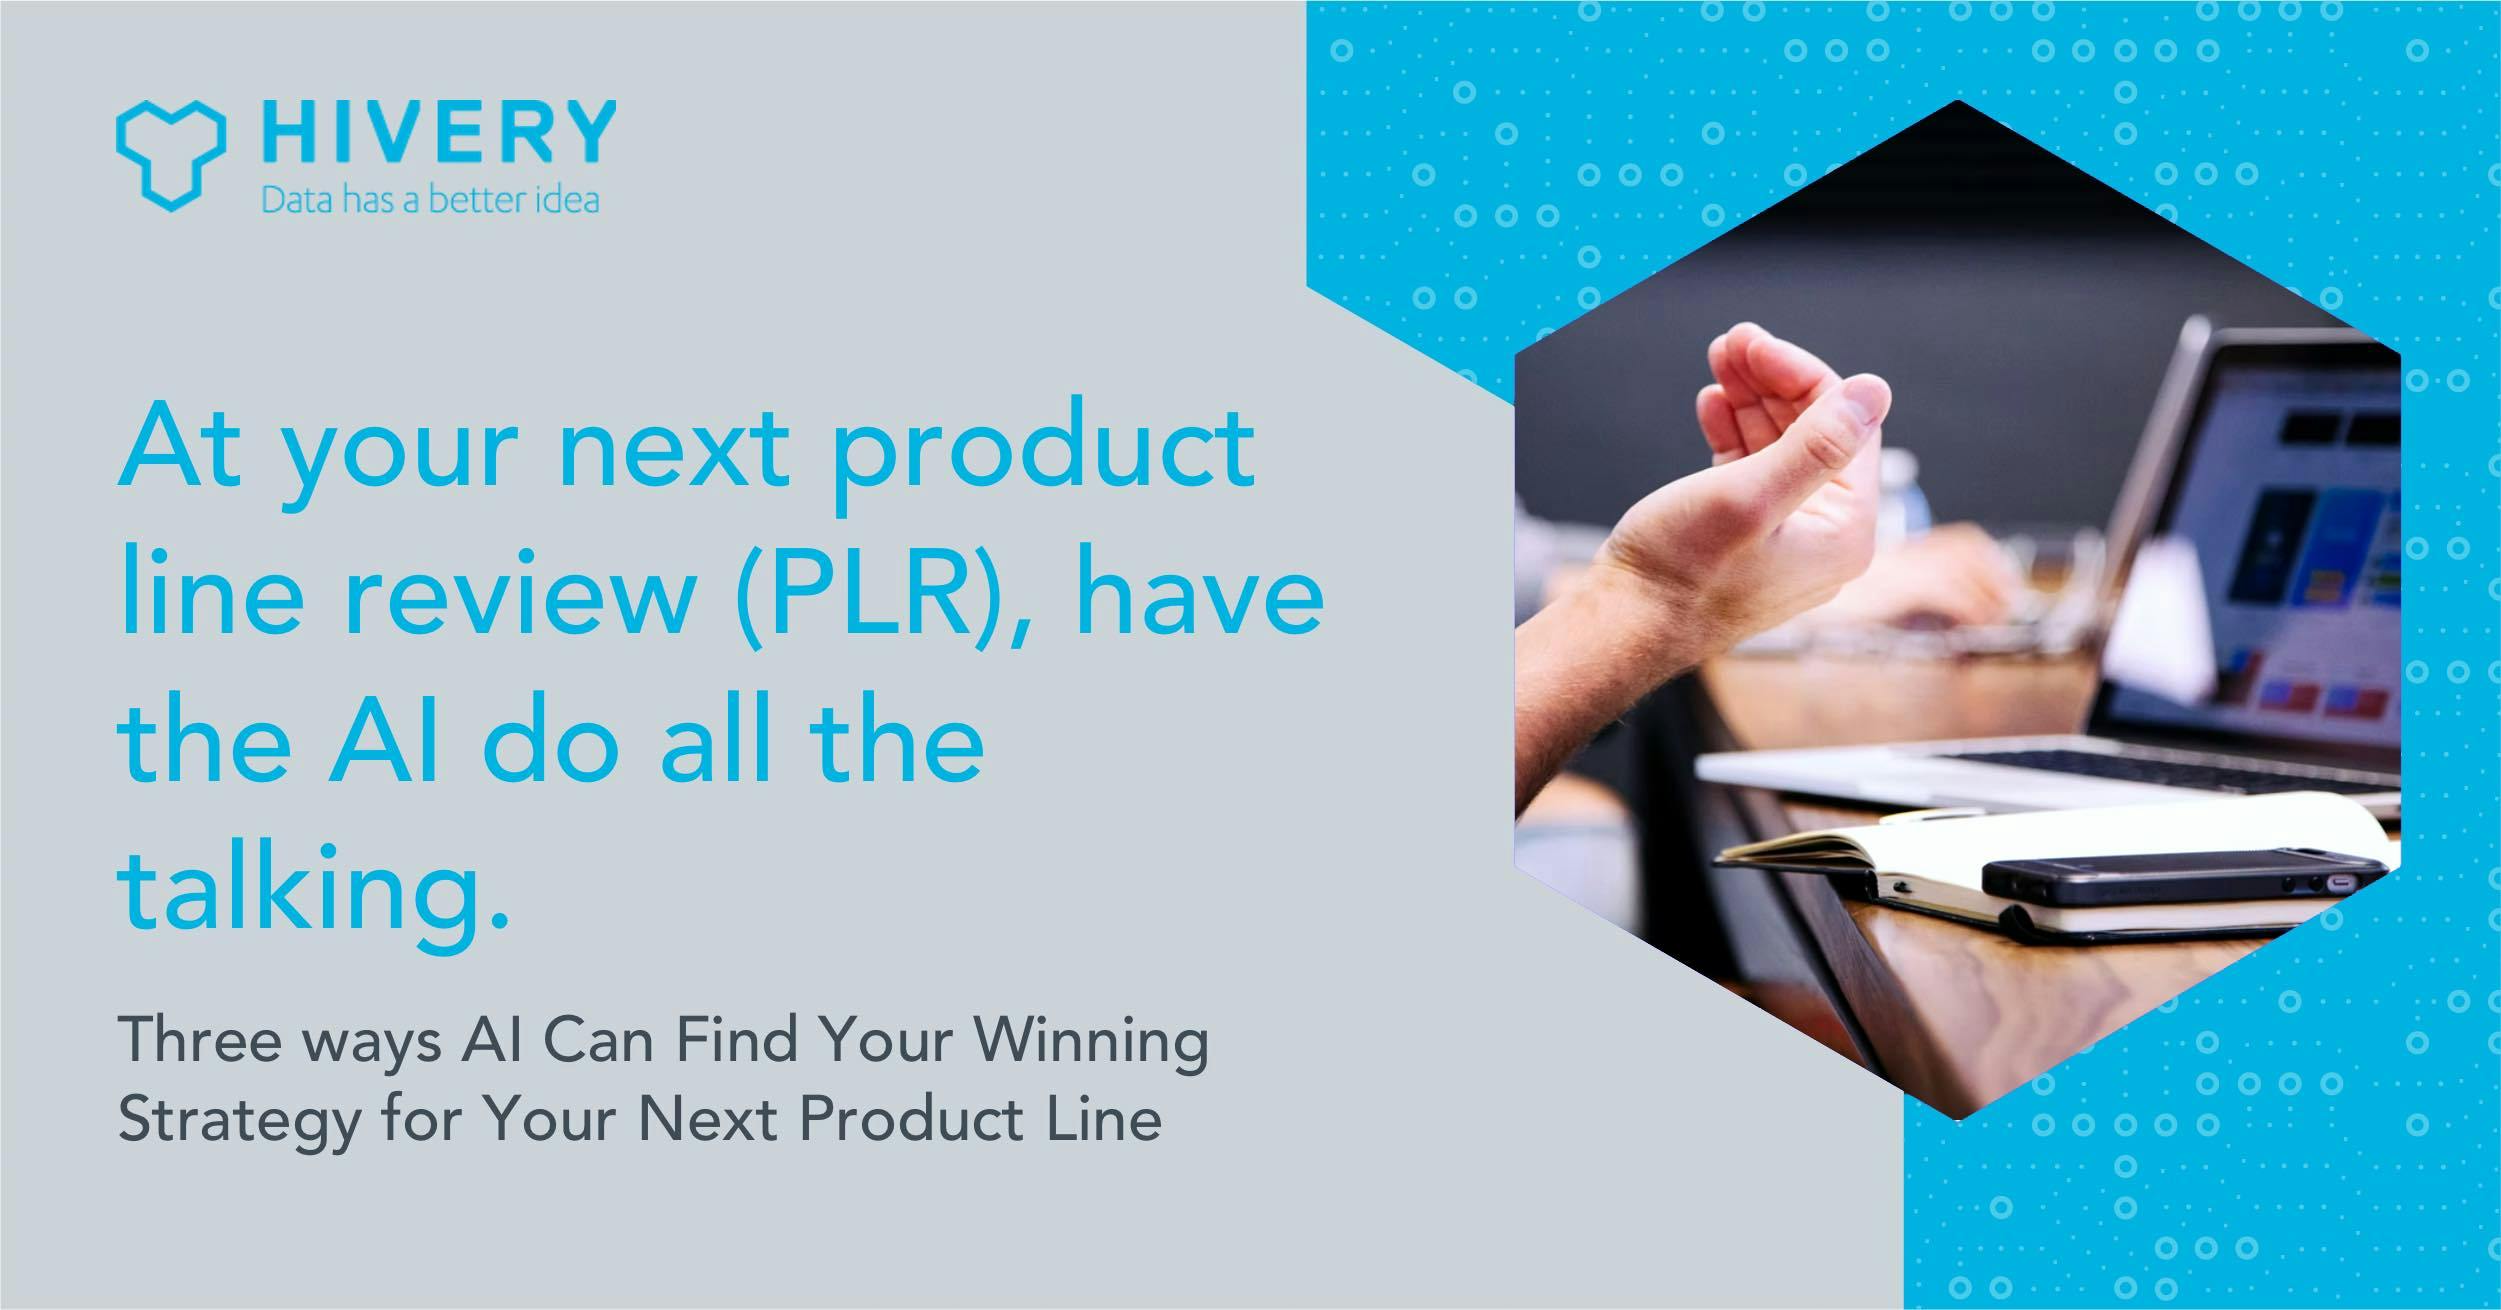 At your next product line review (PLR), have the AI do all the talking.